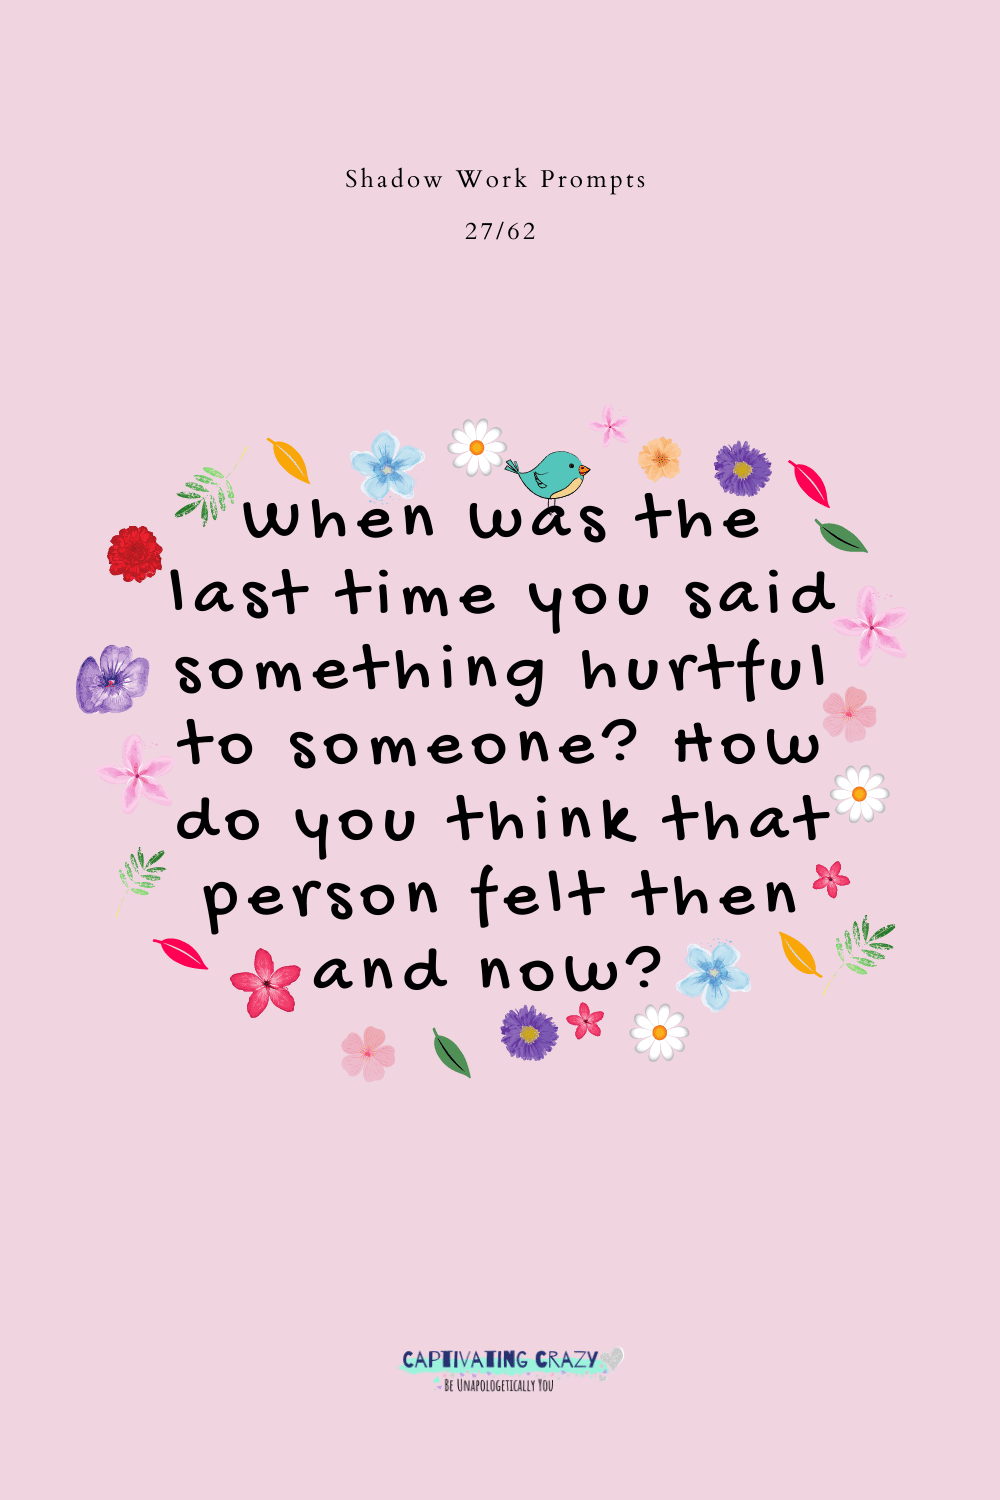 When was the last time you said something hurtful to someone? How do you think that person felt then and now? 